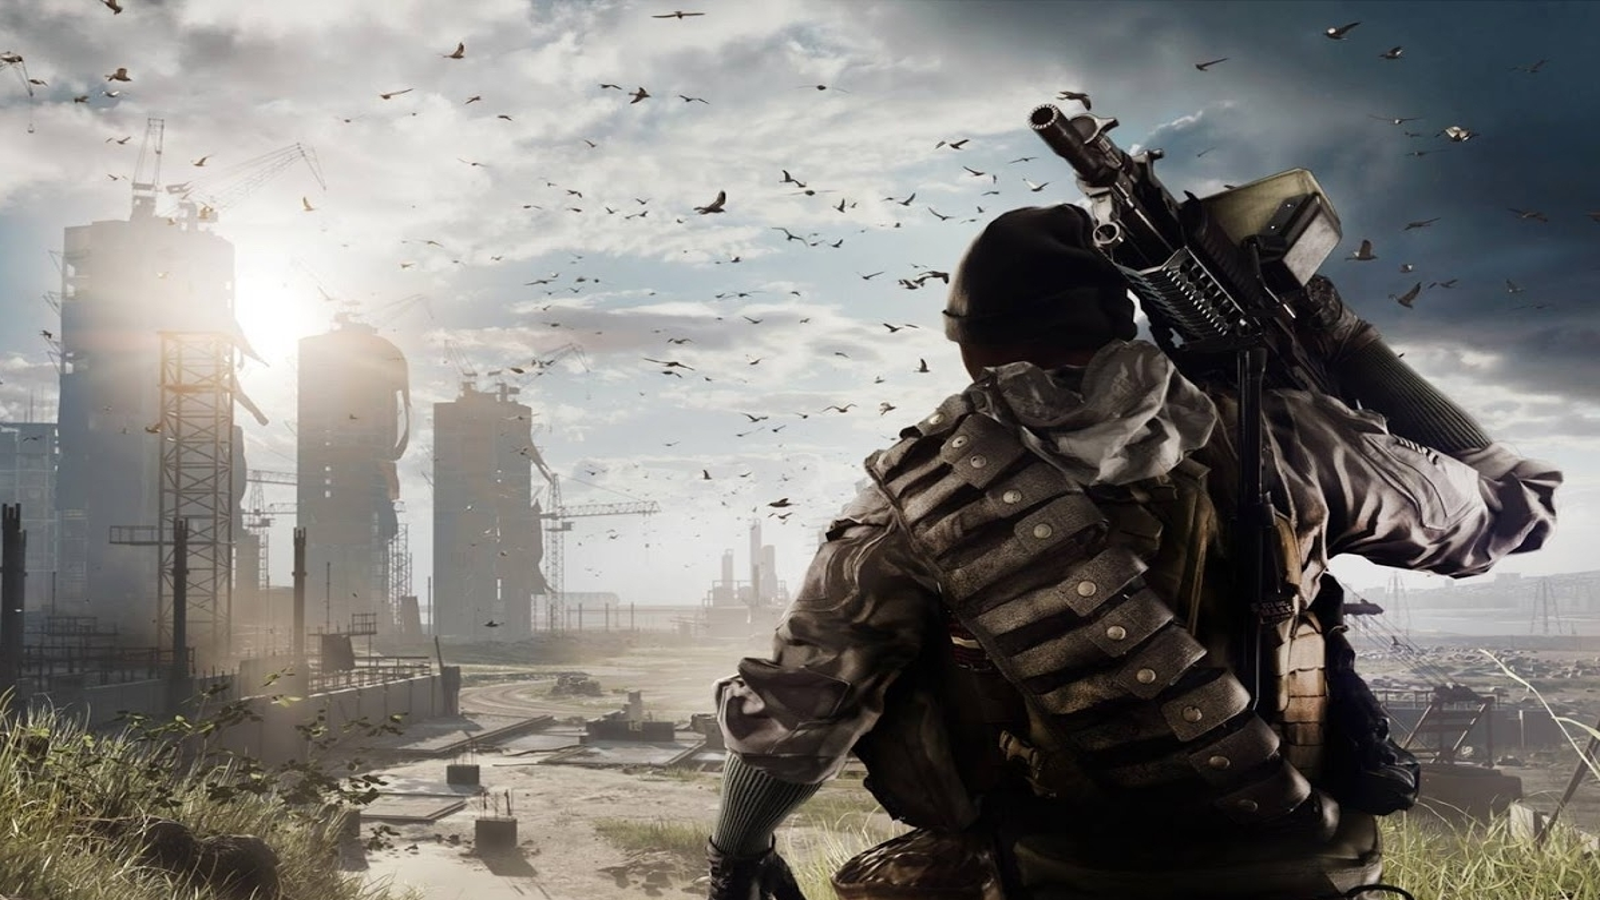 Battlefield 4 PS4 Review - IGN